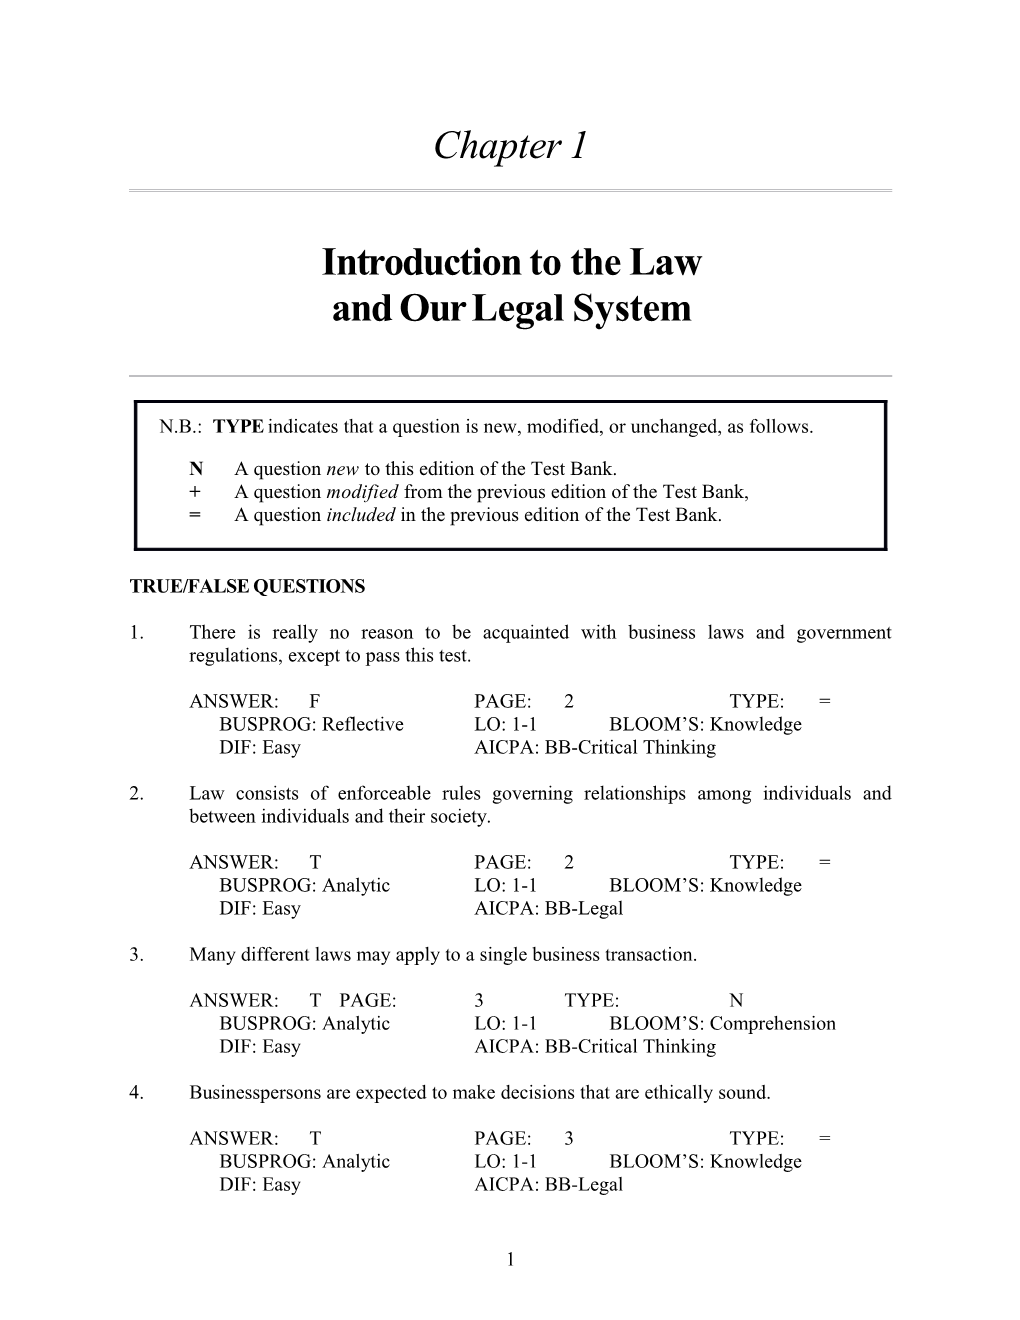 Chapter 1: Introduction to the Law and Our Legal System 3